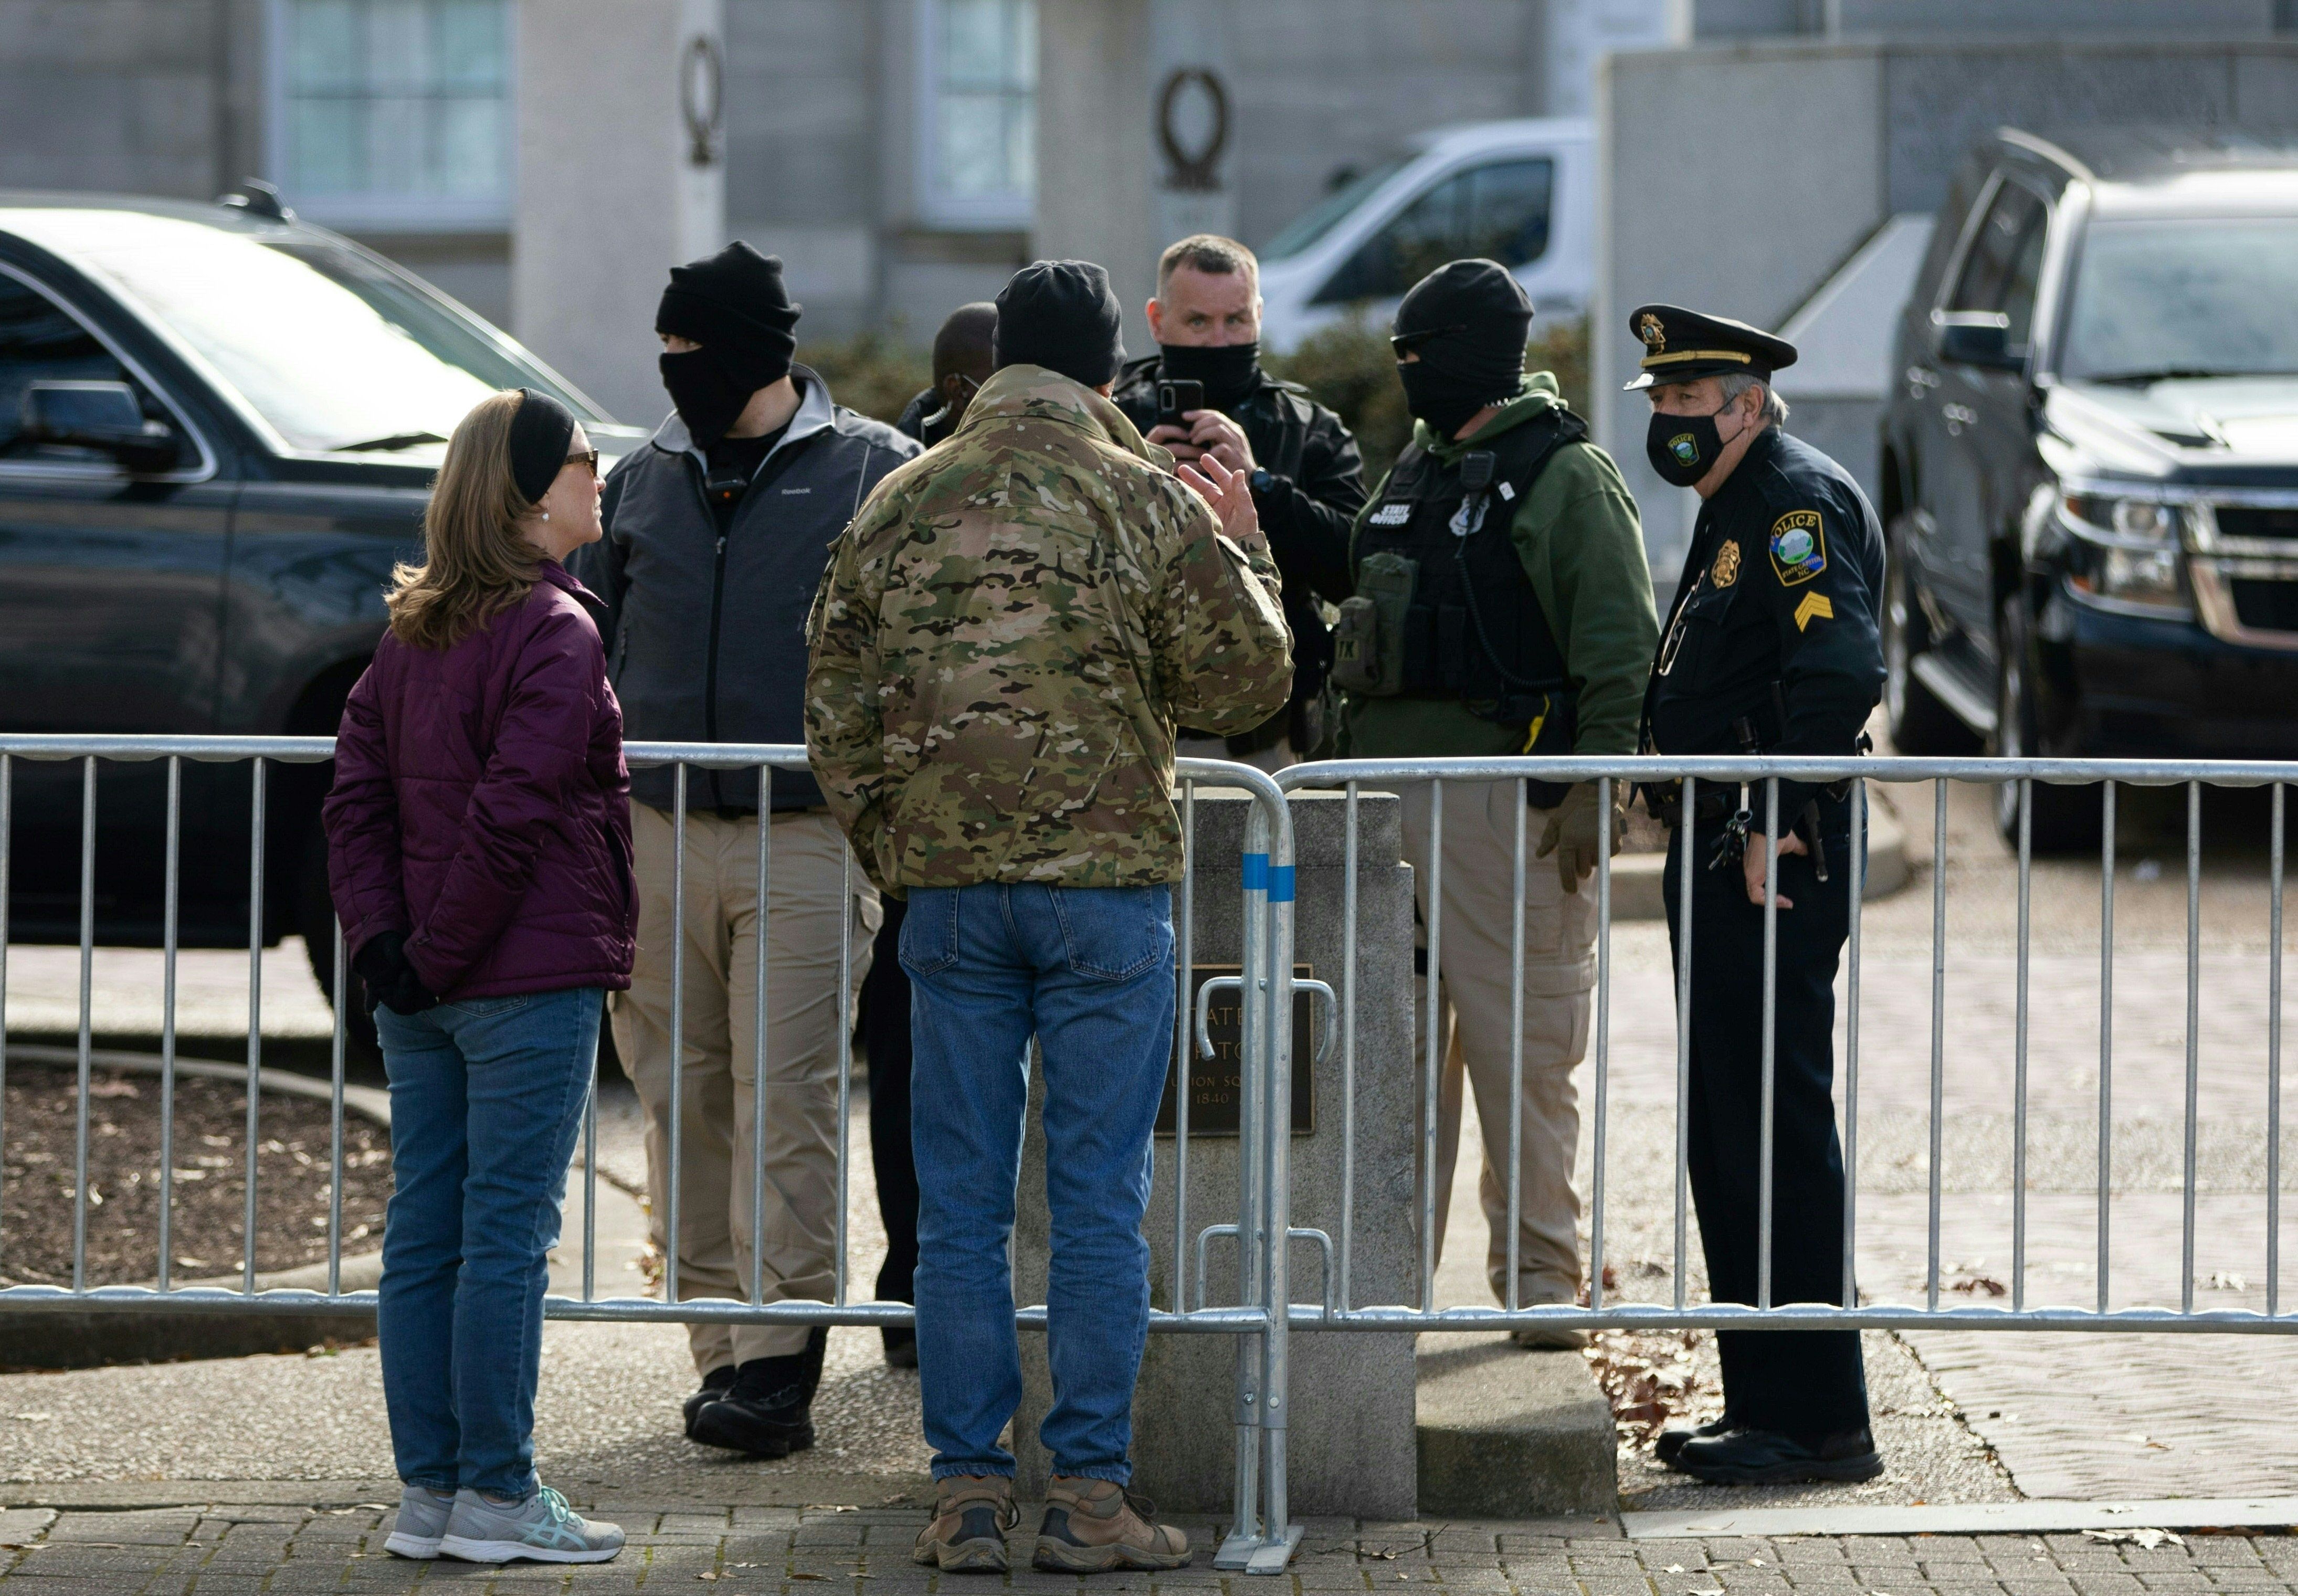 A man has a conversation with law enforcement in front of the state capitol building in downtown Raleigh, North Carolina, on January 17